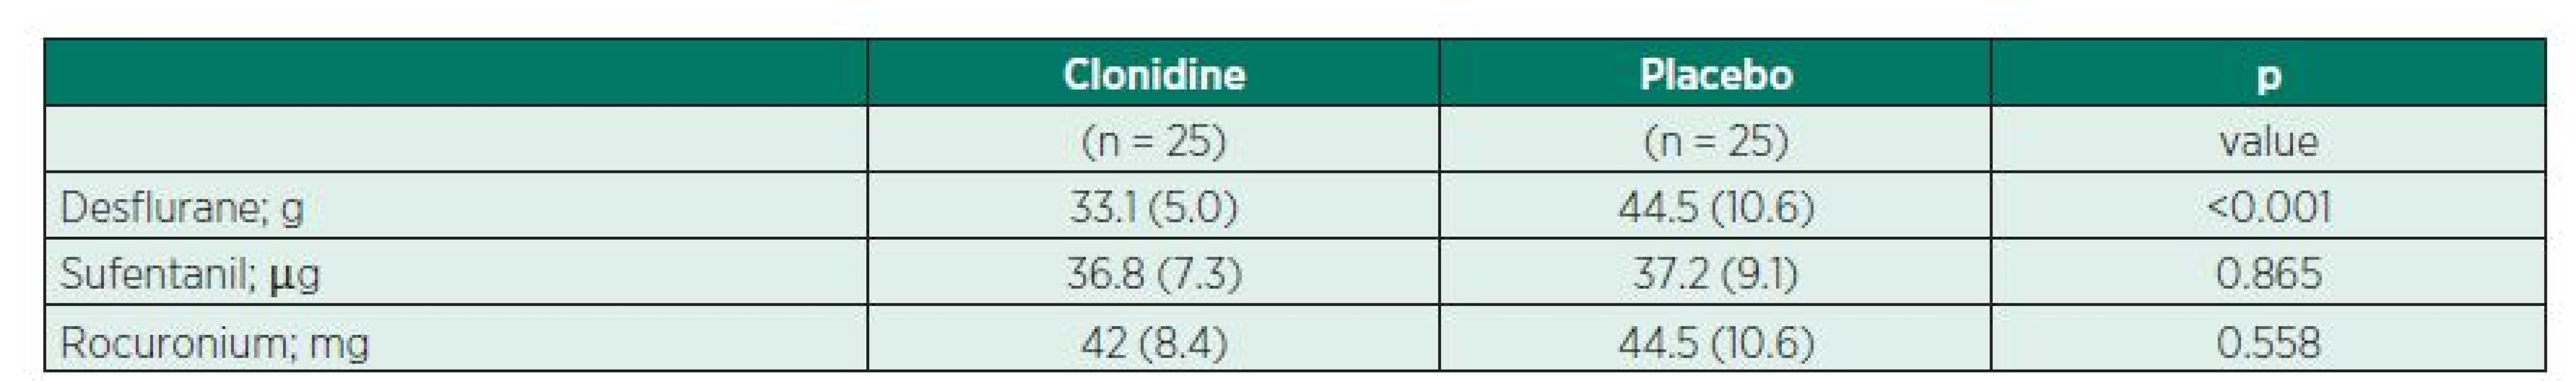 Consumption of anaesthetic drugs in clonidine or placebo group